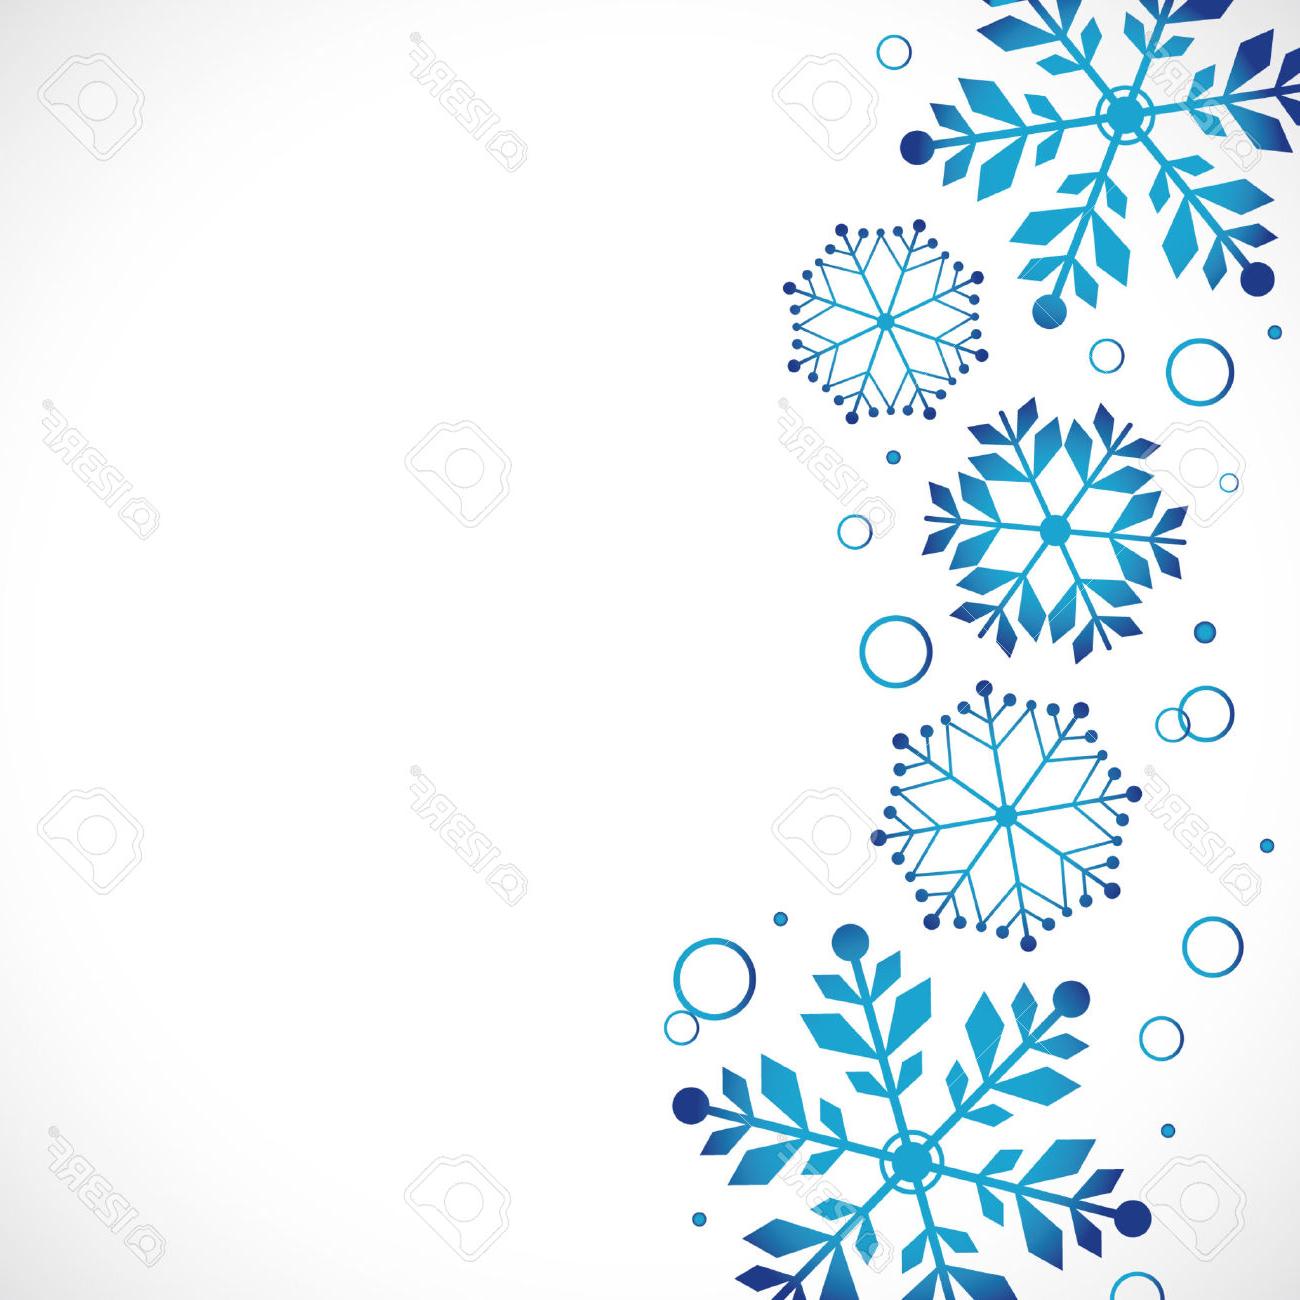 Best Winter Snowflakes Border Clip Art Drawing